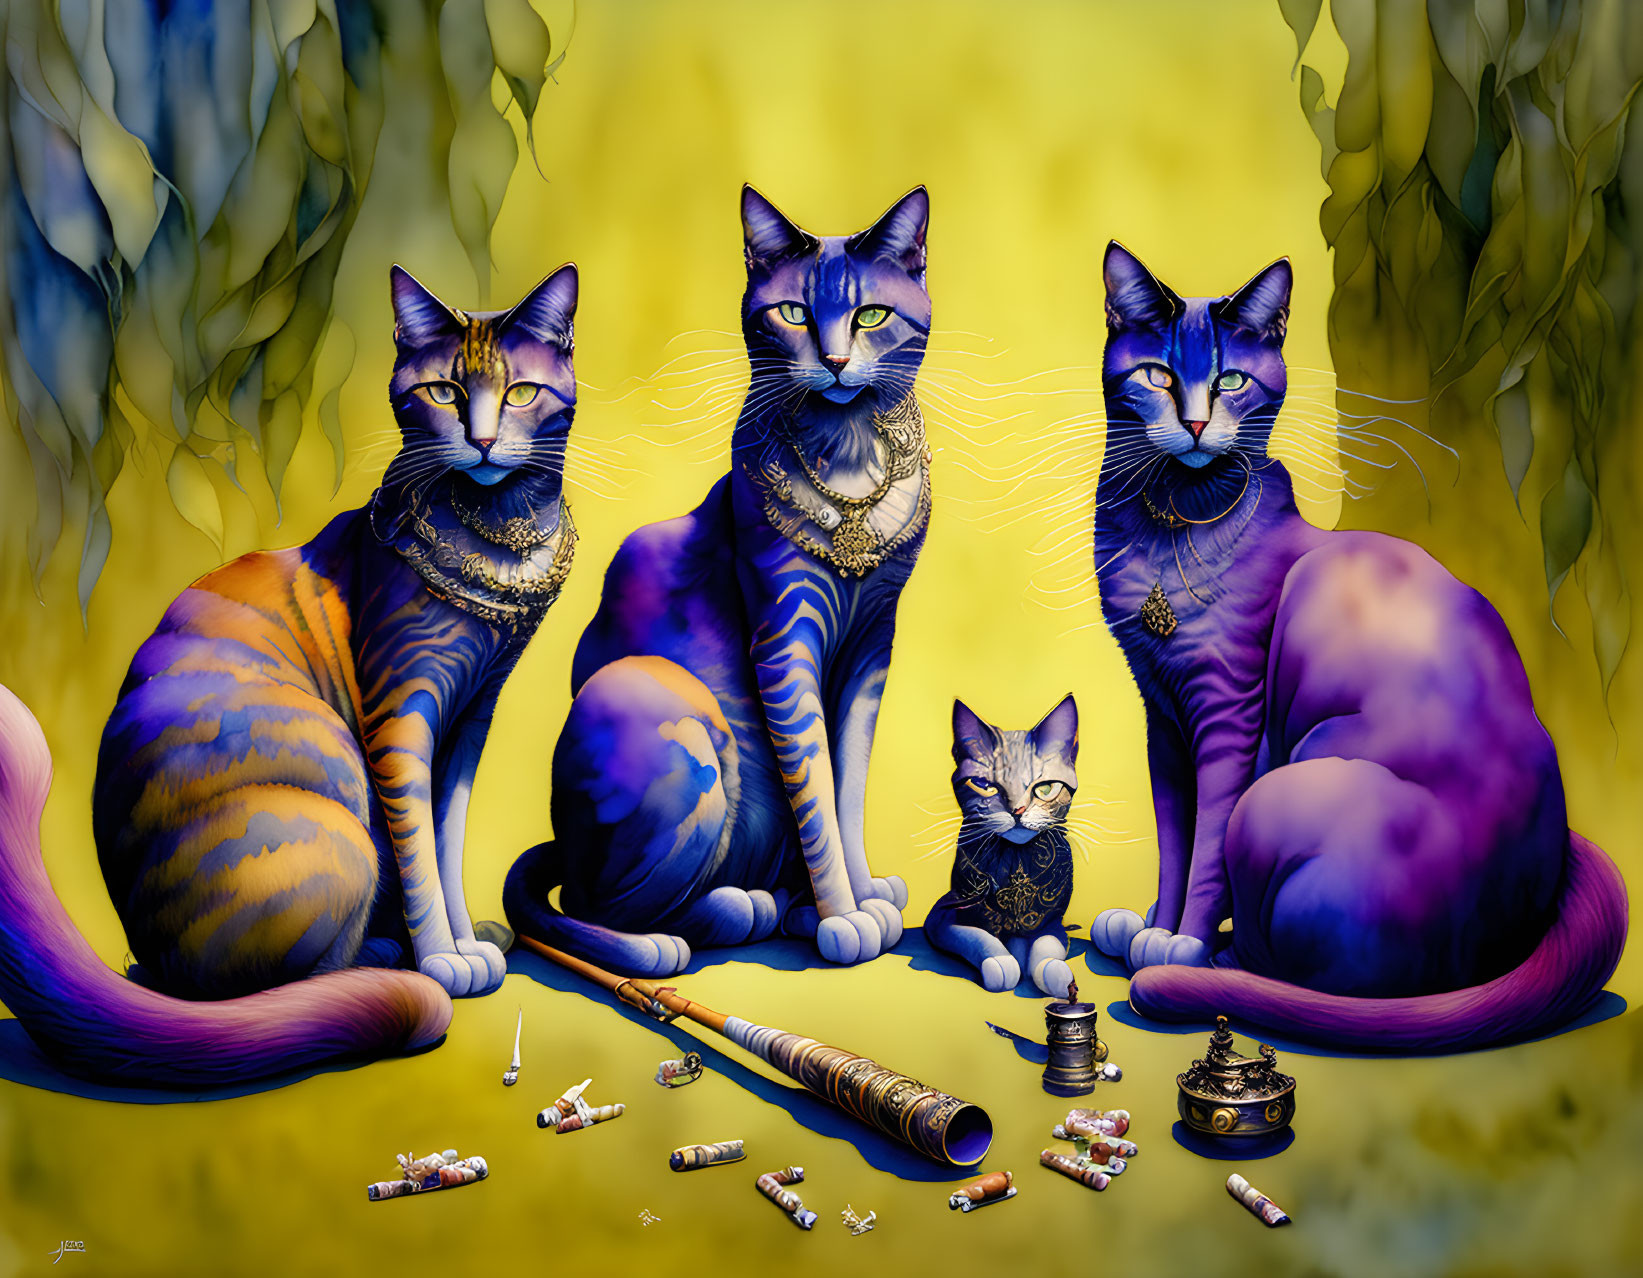 Four stylized cats with intense blue eyes in surreal yellow and purple setting with candy wrappers, flute,